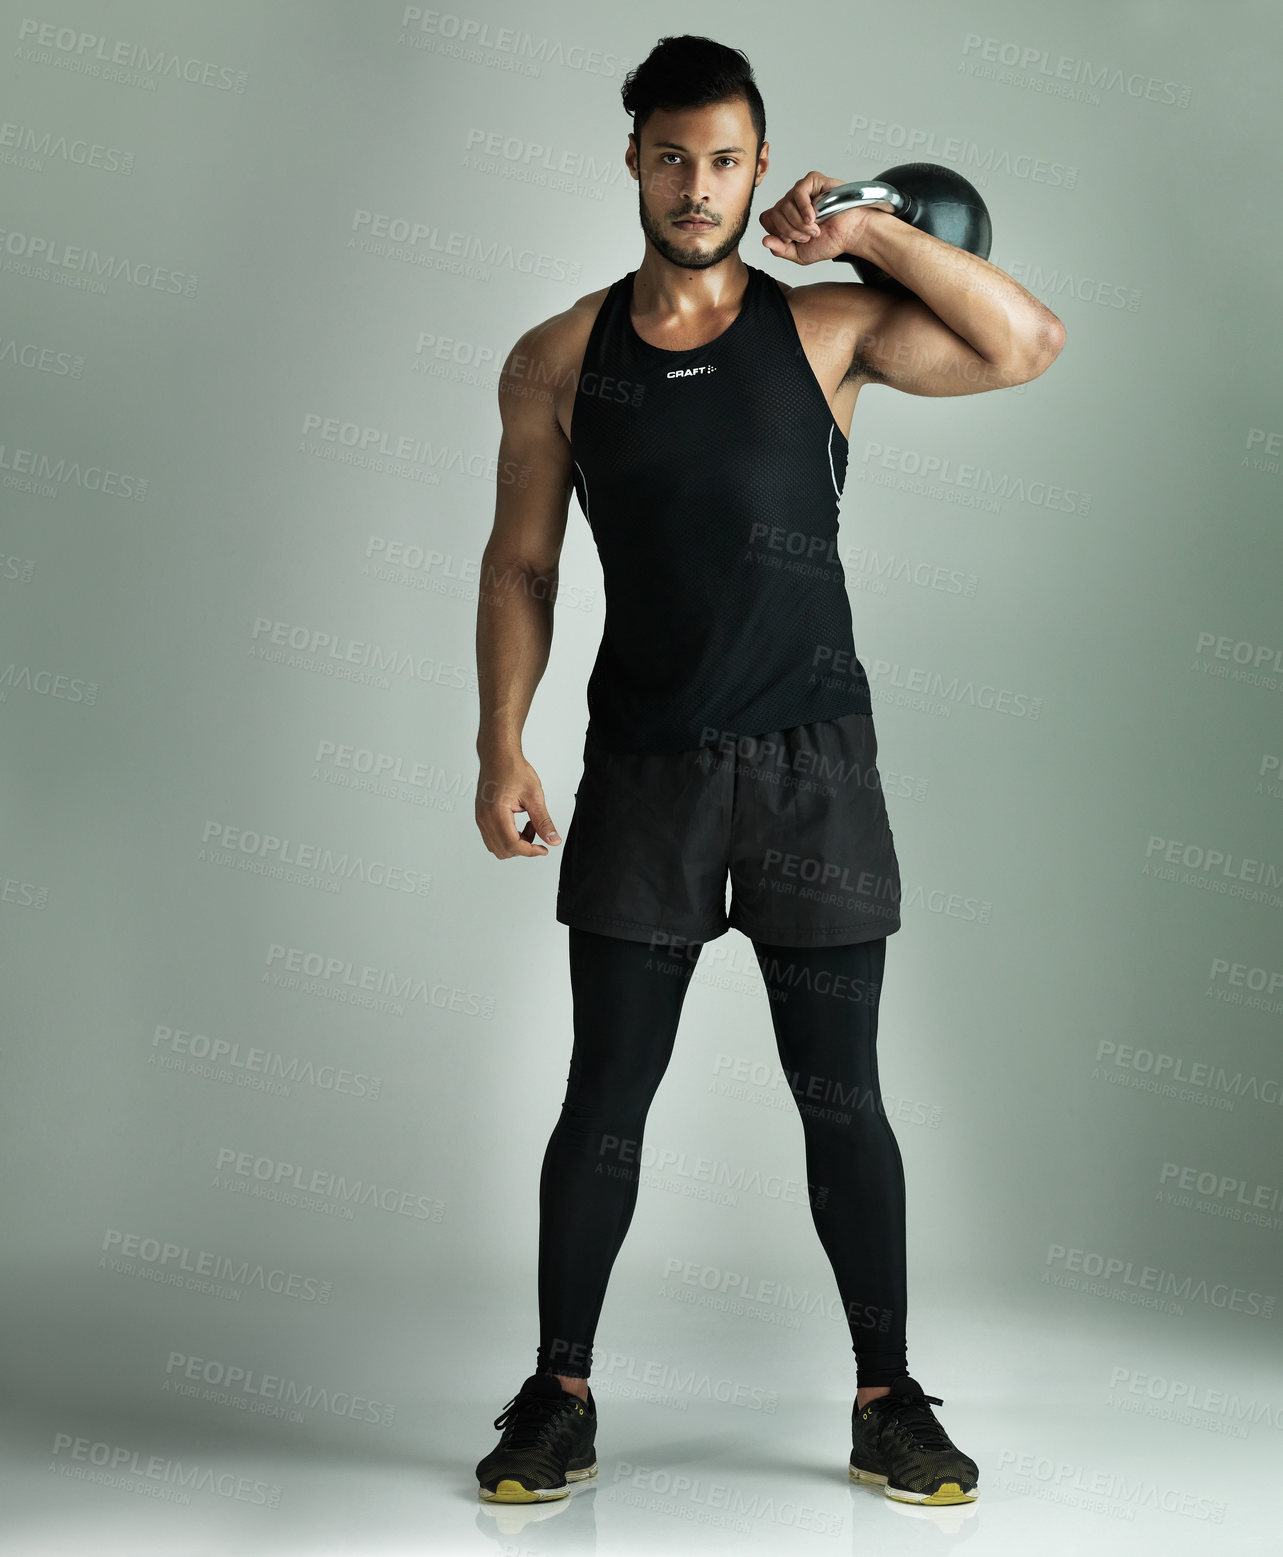 Buy stock photo Studio shot of a young man working out with a kettle bell against a gray background